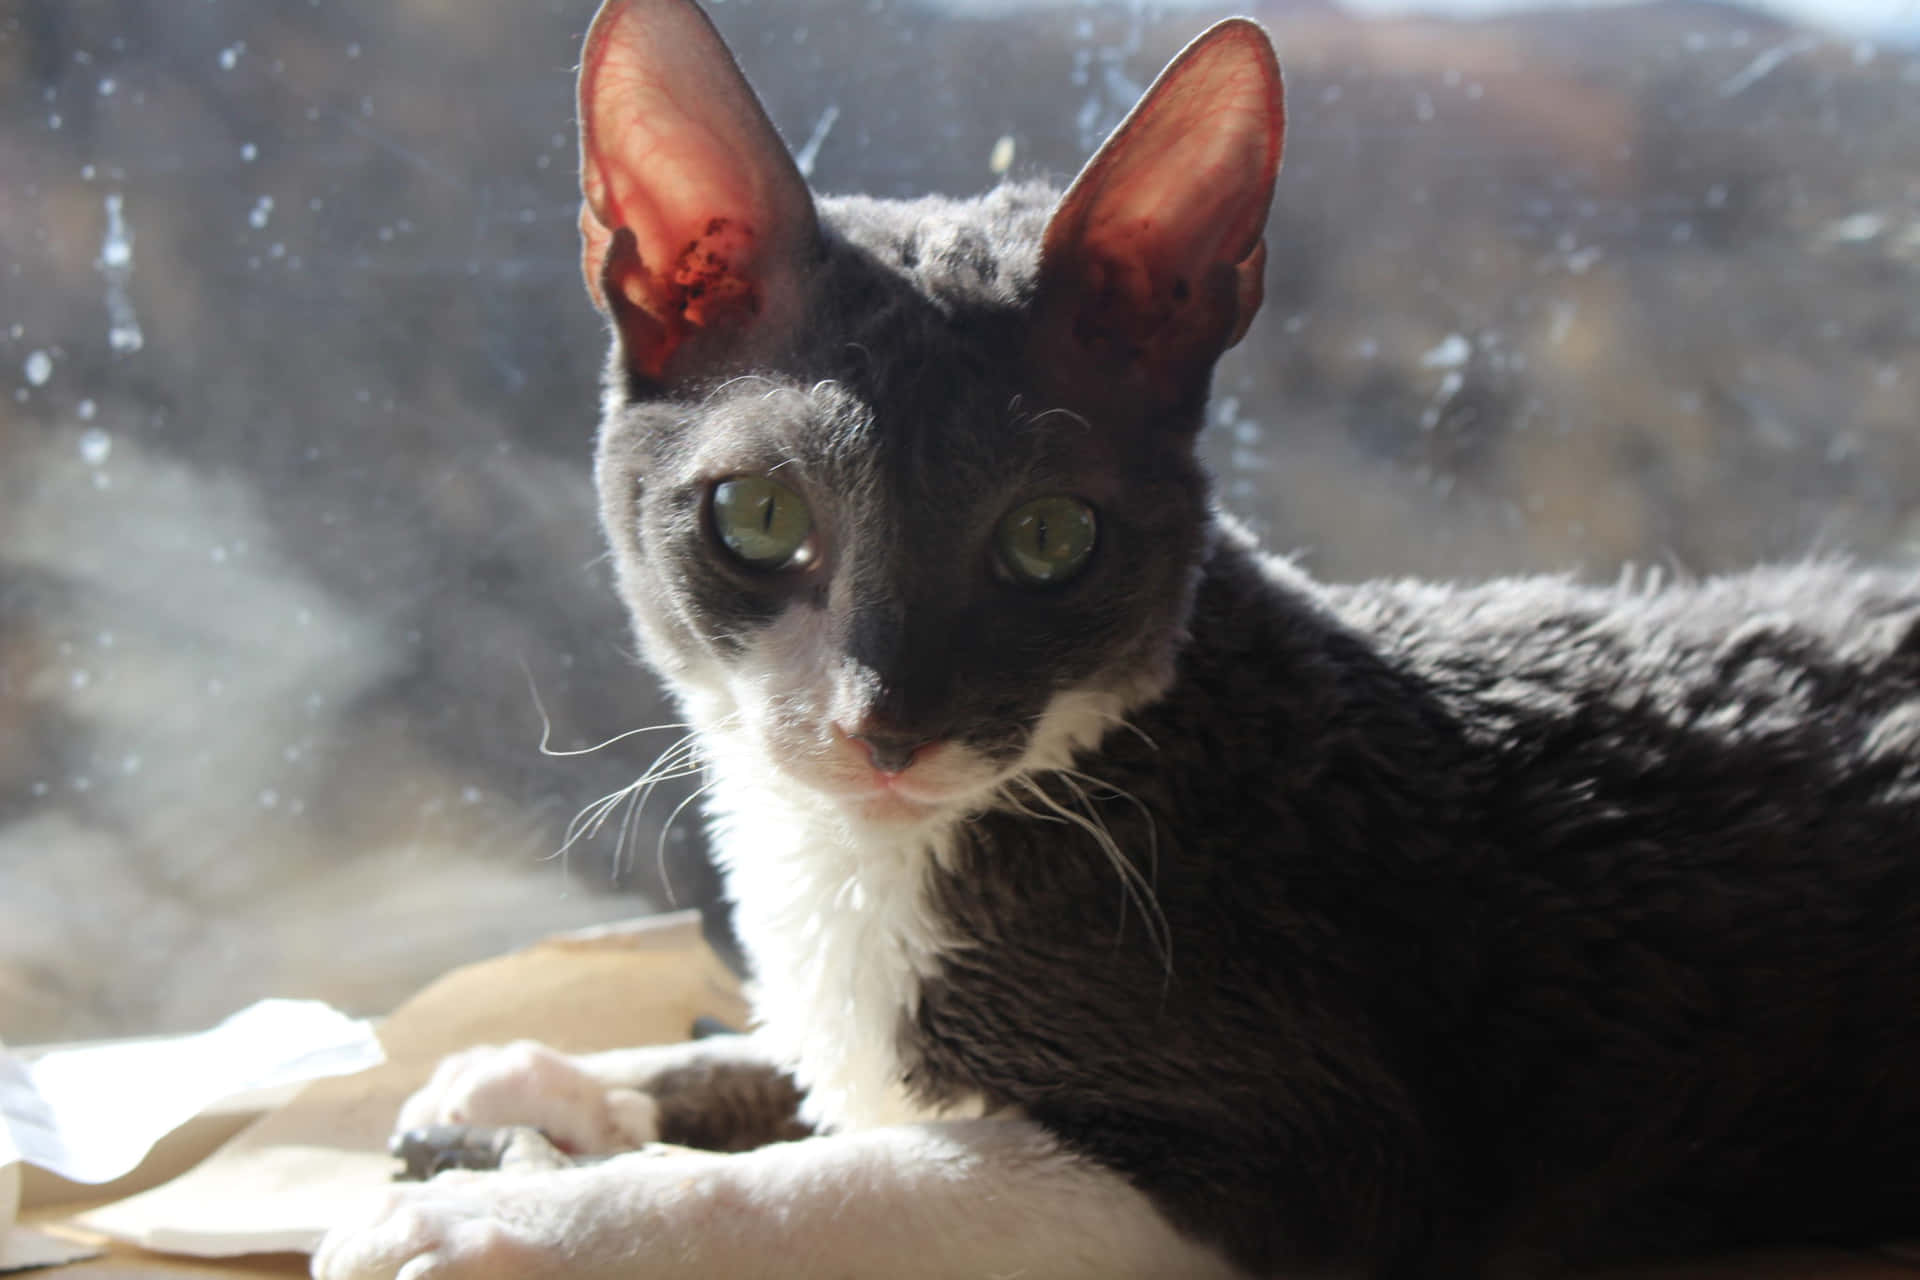 Adorable Cornish Rex cat lounging on the floor Wallpaper